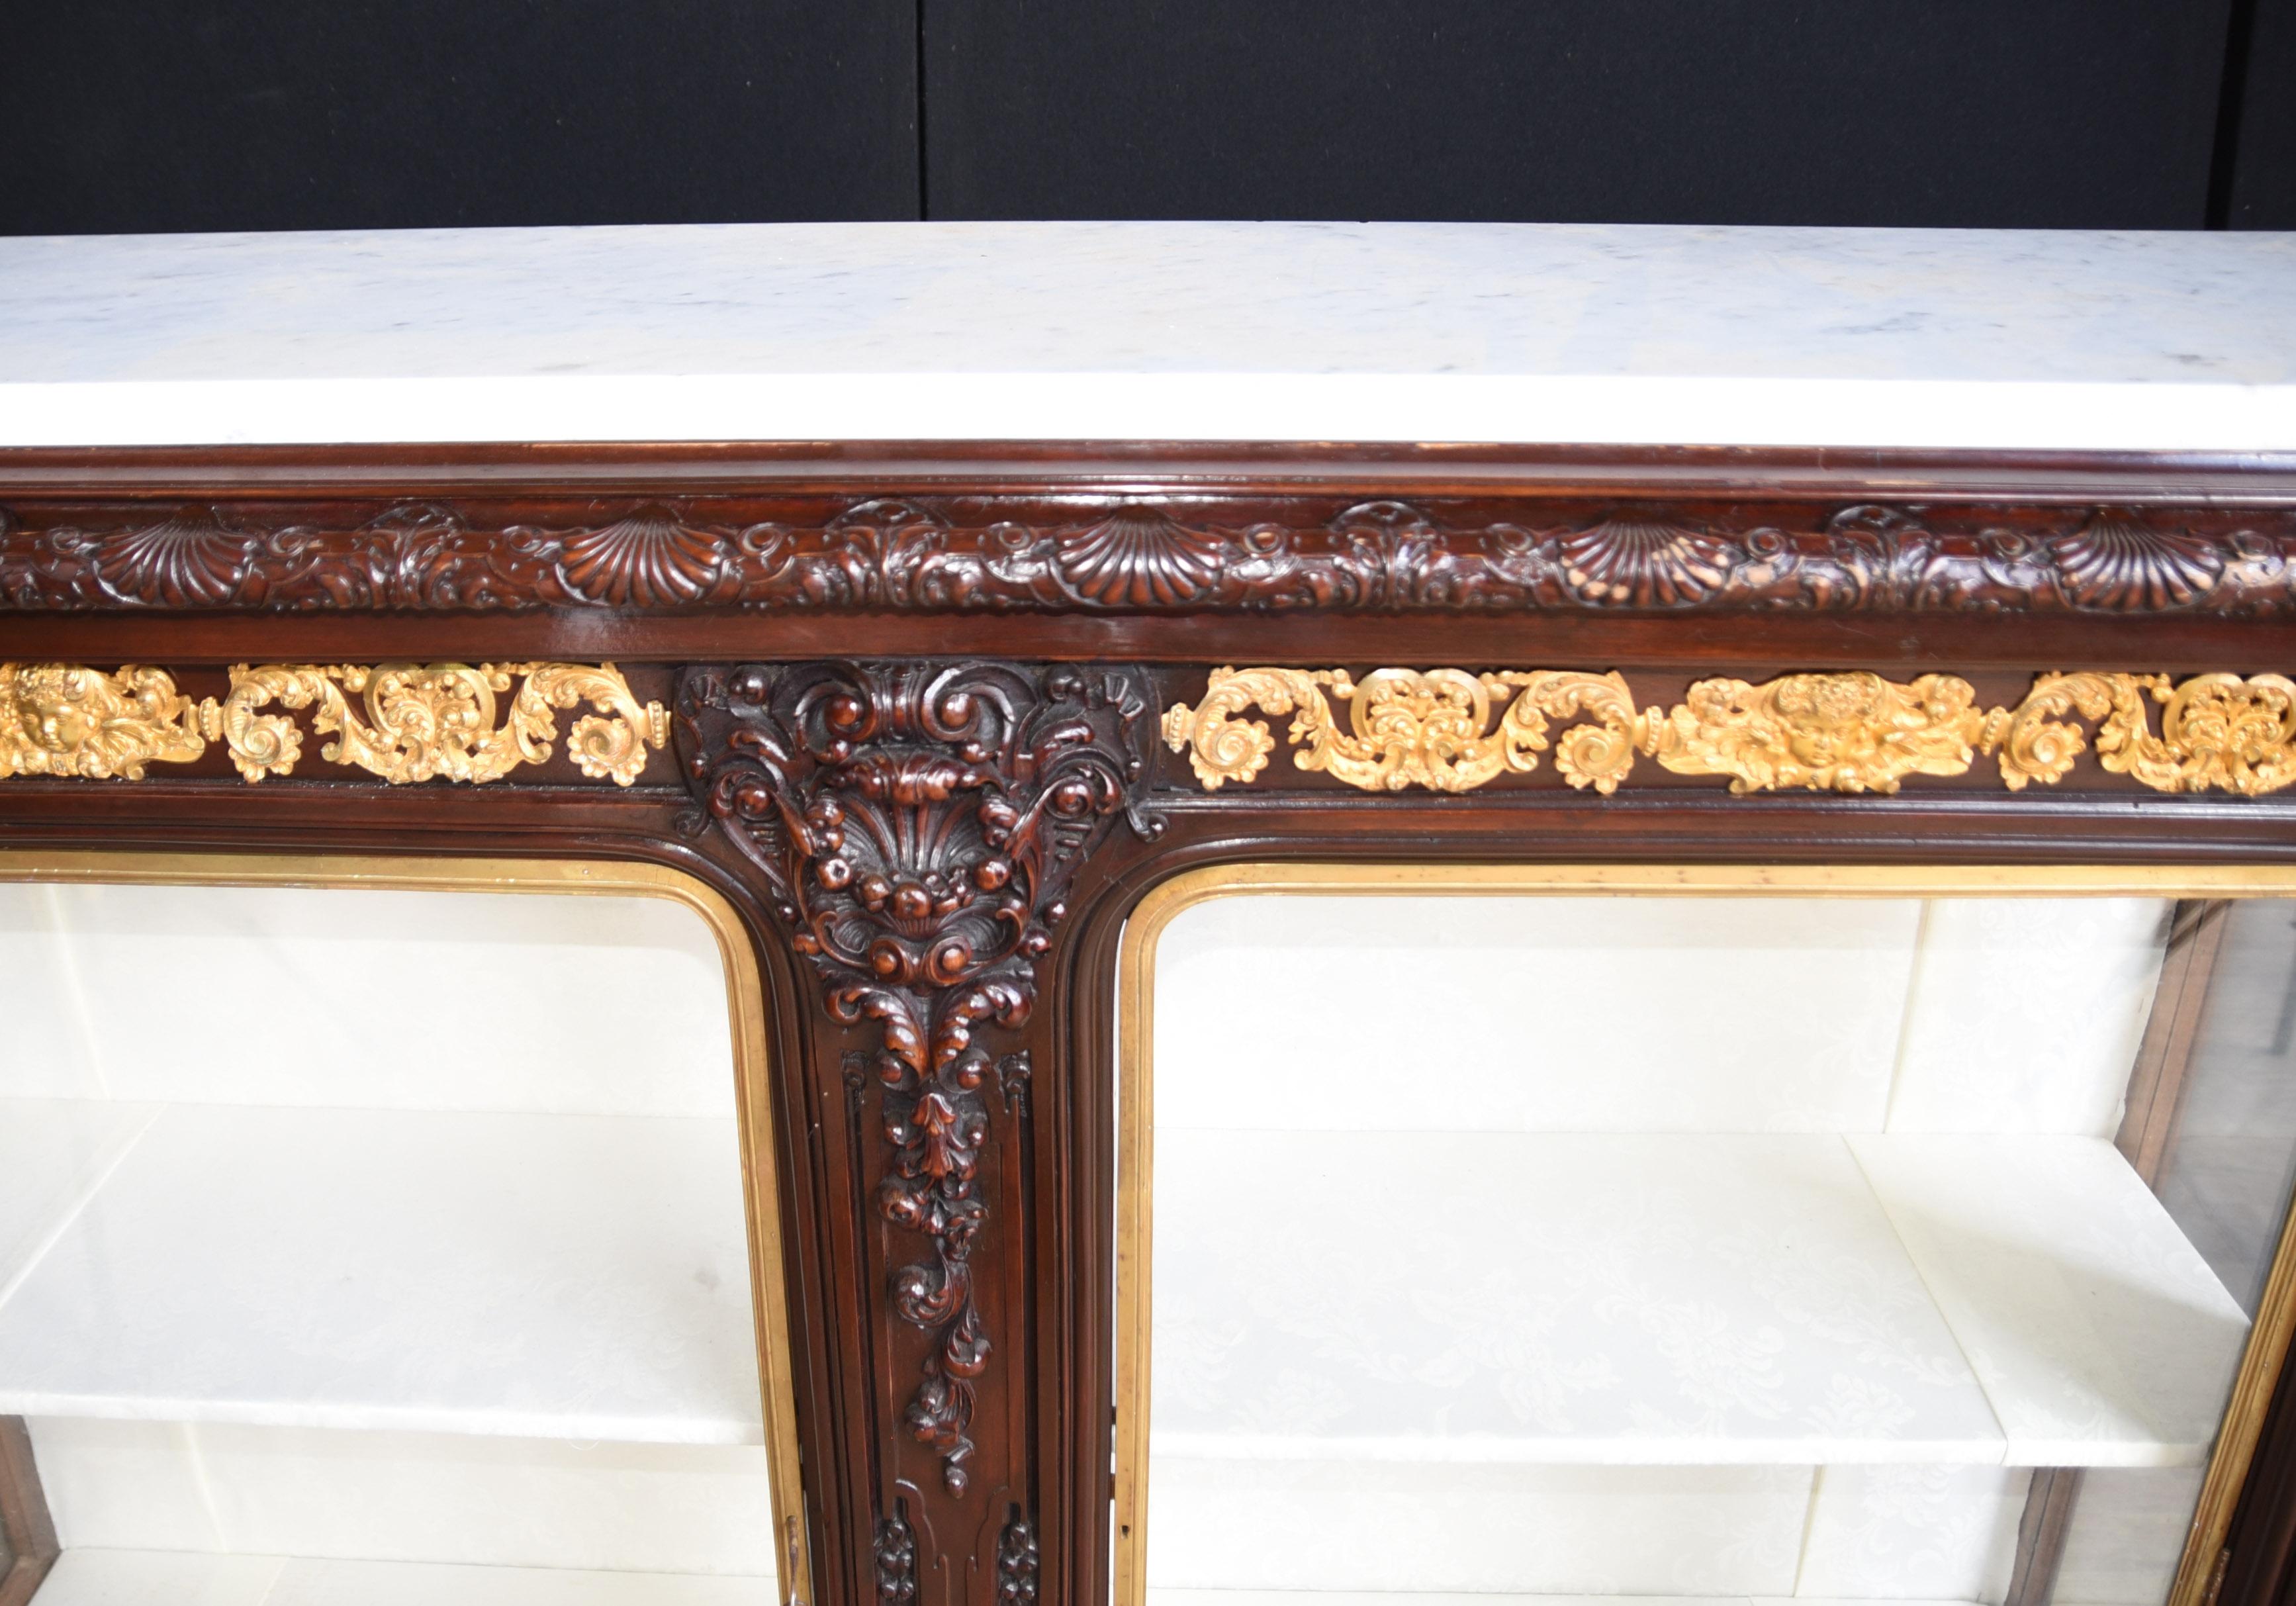 - Stunning French double fronted sideboard / display cabinet
- Highest quality with hand carved details in rosewood
- Ormolu fixtures incredibly detailed and intricate
- Purchased from a dealer on Marche Biron at Paris antiques markets
- White